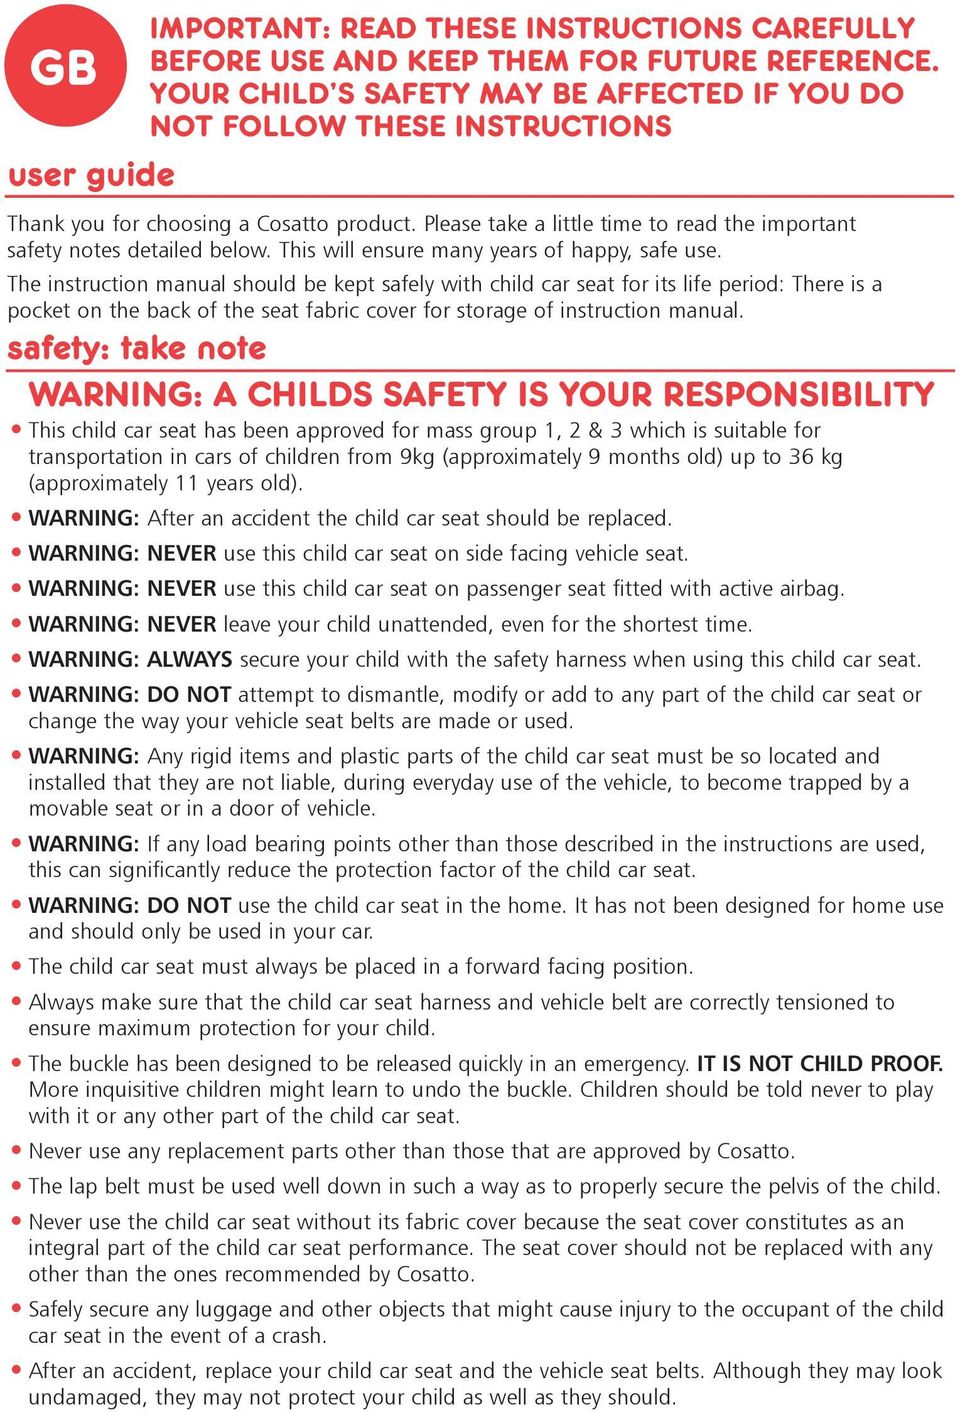 Please take a little time to read the important safety notes detailed below. This will ensure many years of happy, safe use.